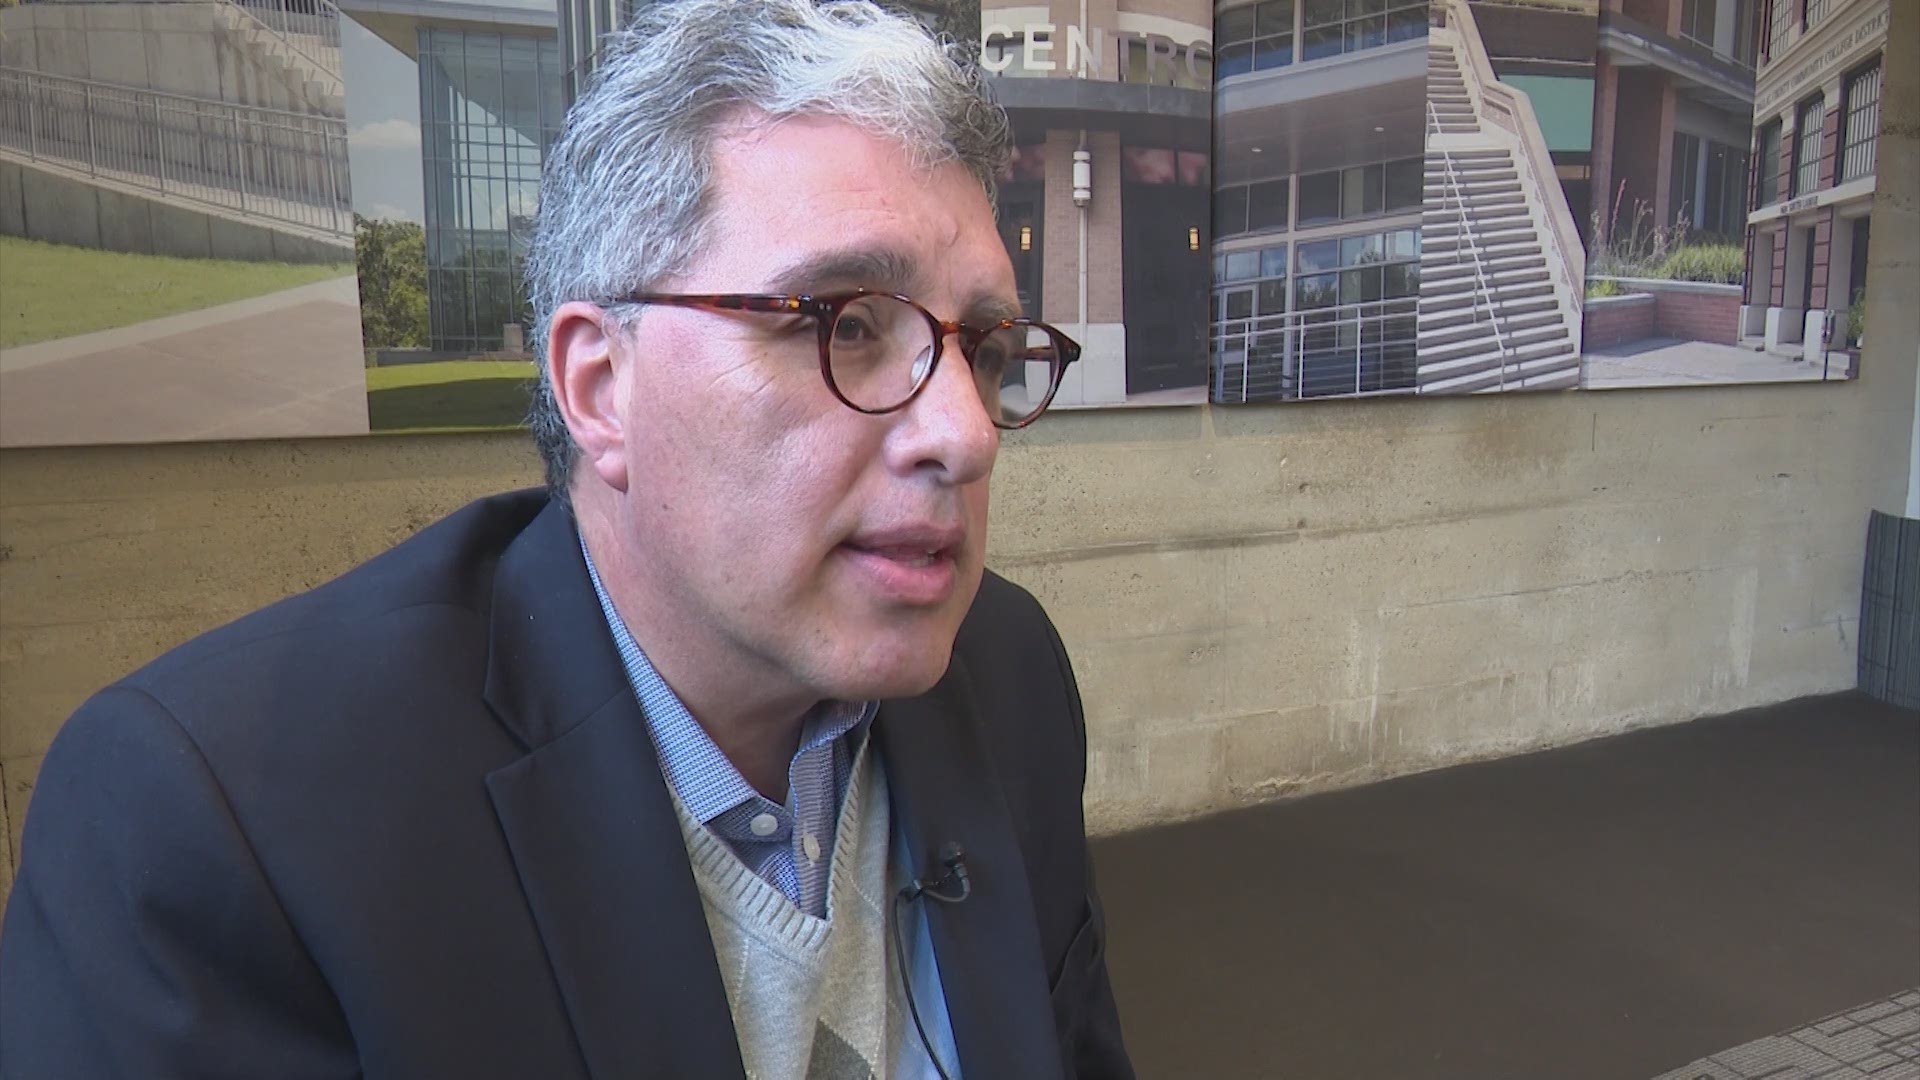 Dallas County Community College District's faculty president Carlos Martinez doesn't expect upcoming consolidation to impact staffing at the seven campuses.